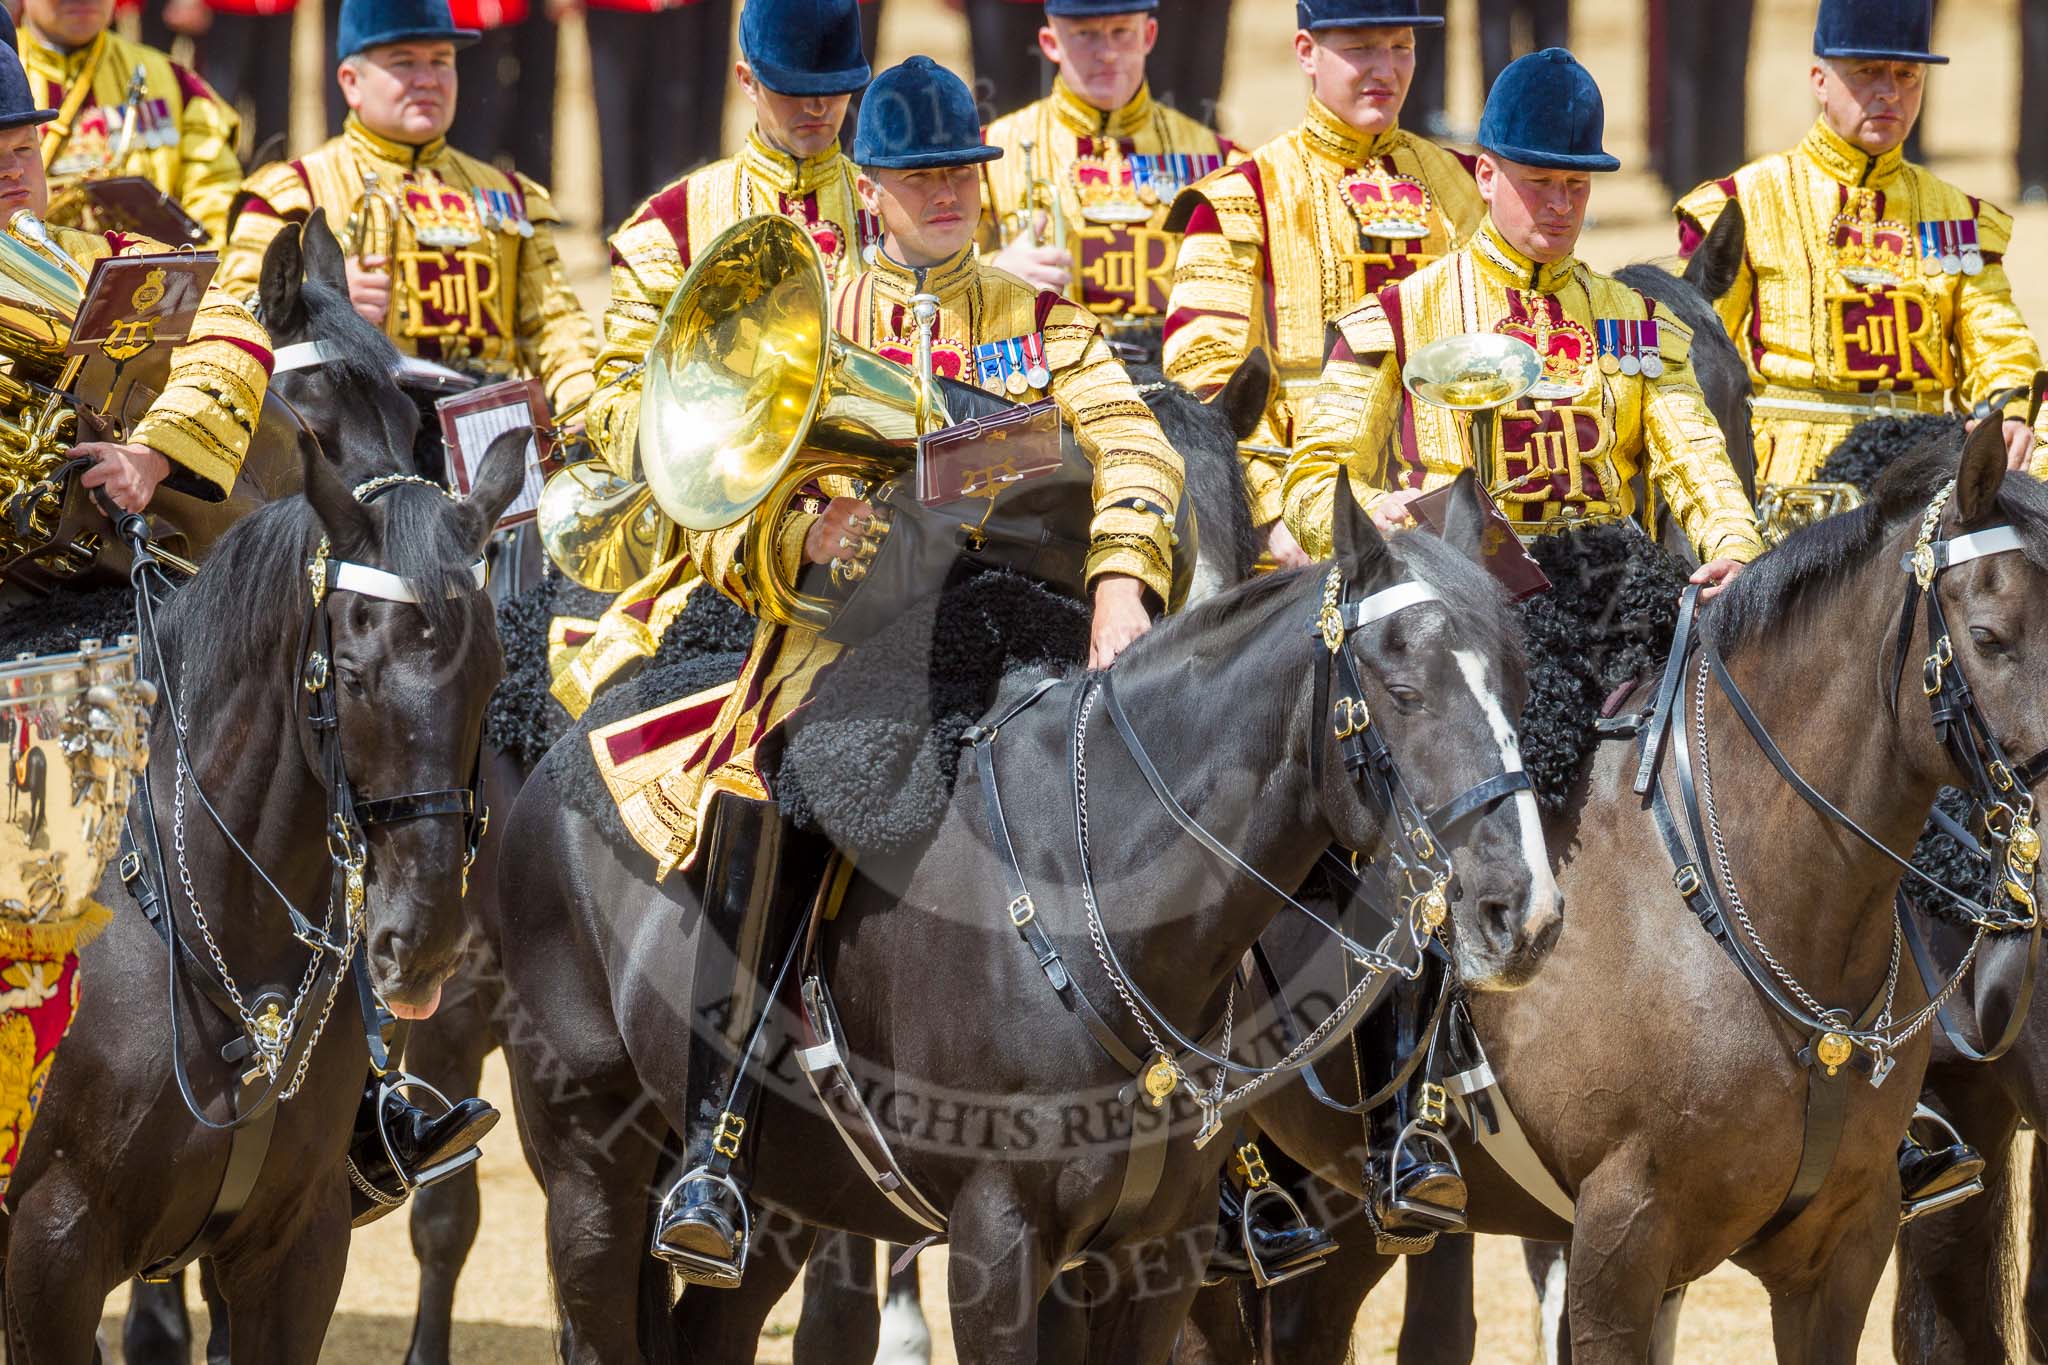 The Colonel's Review 2015.
Horse Guards Parade, Westminster,
London,

United Kingdom,
on 06 June 2015 at 11:58, image #540